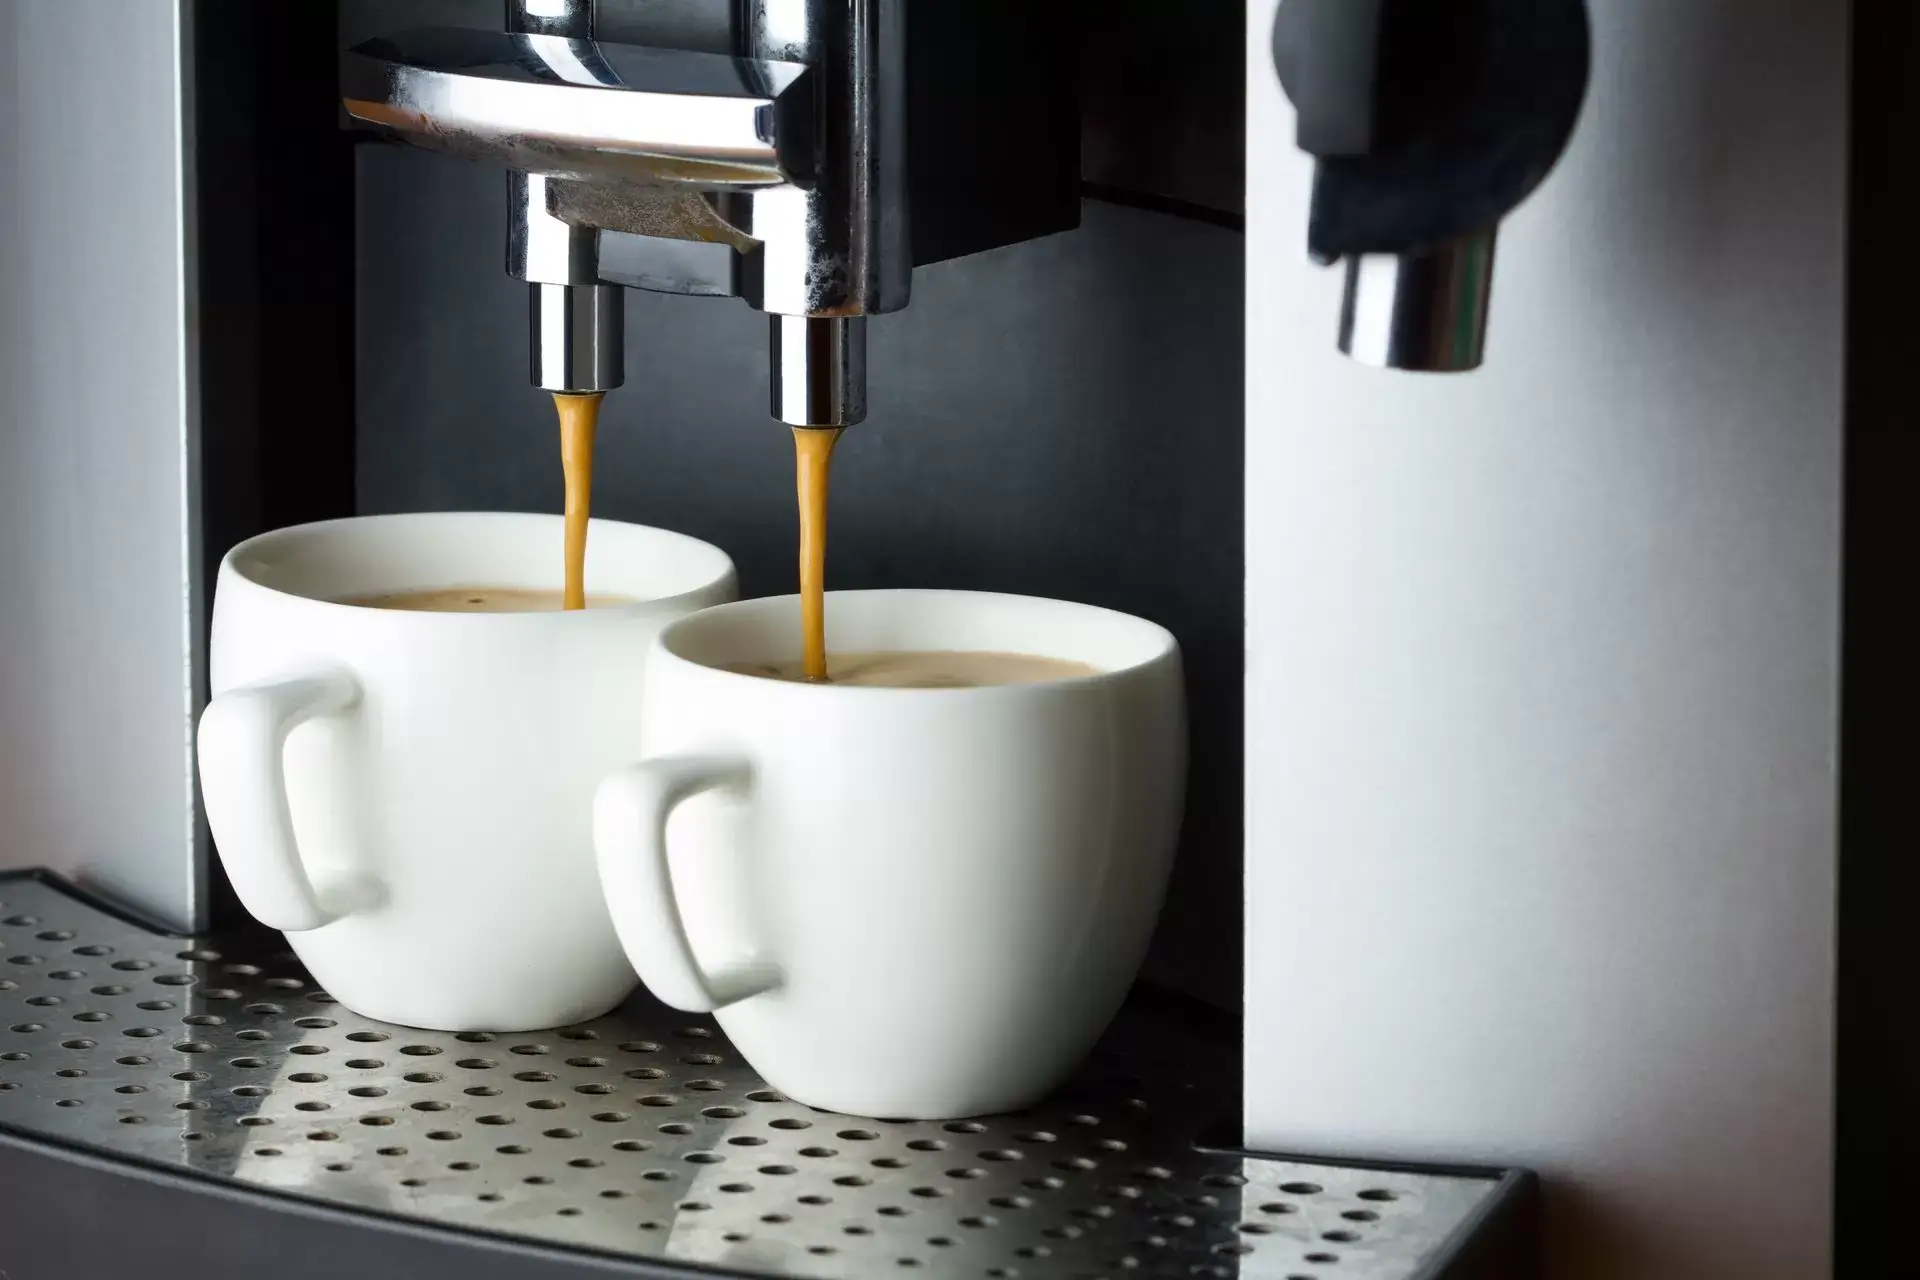 How to descale your coffee machine